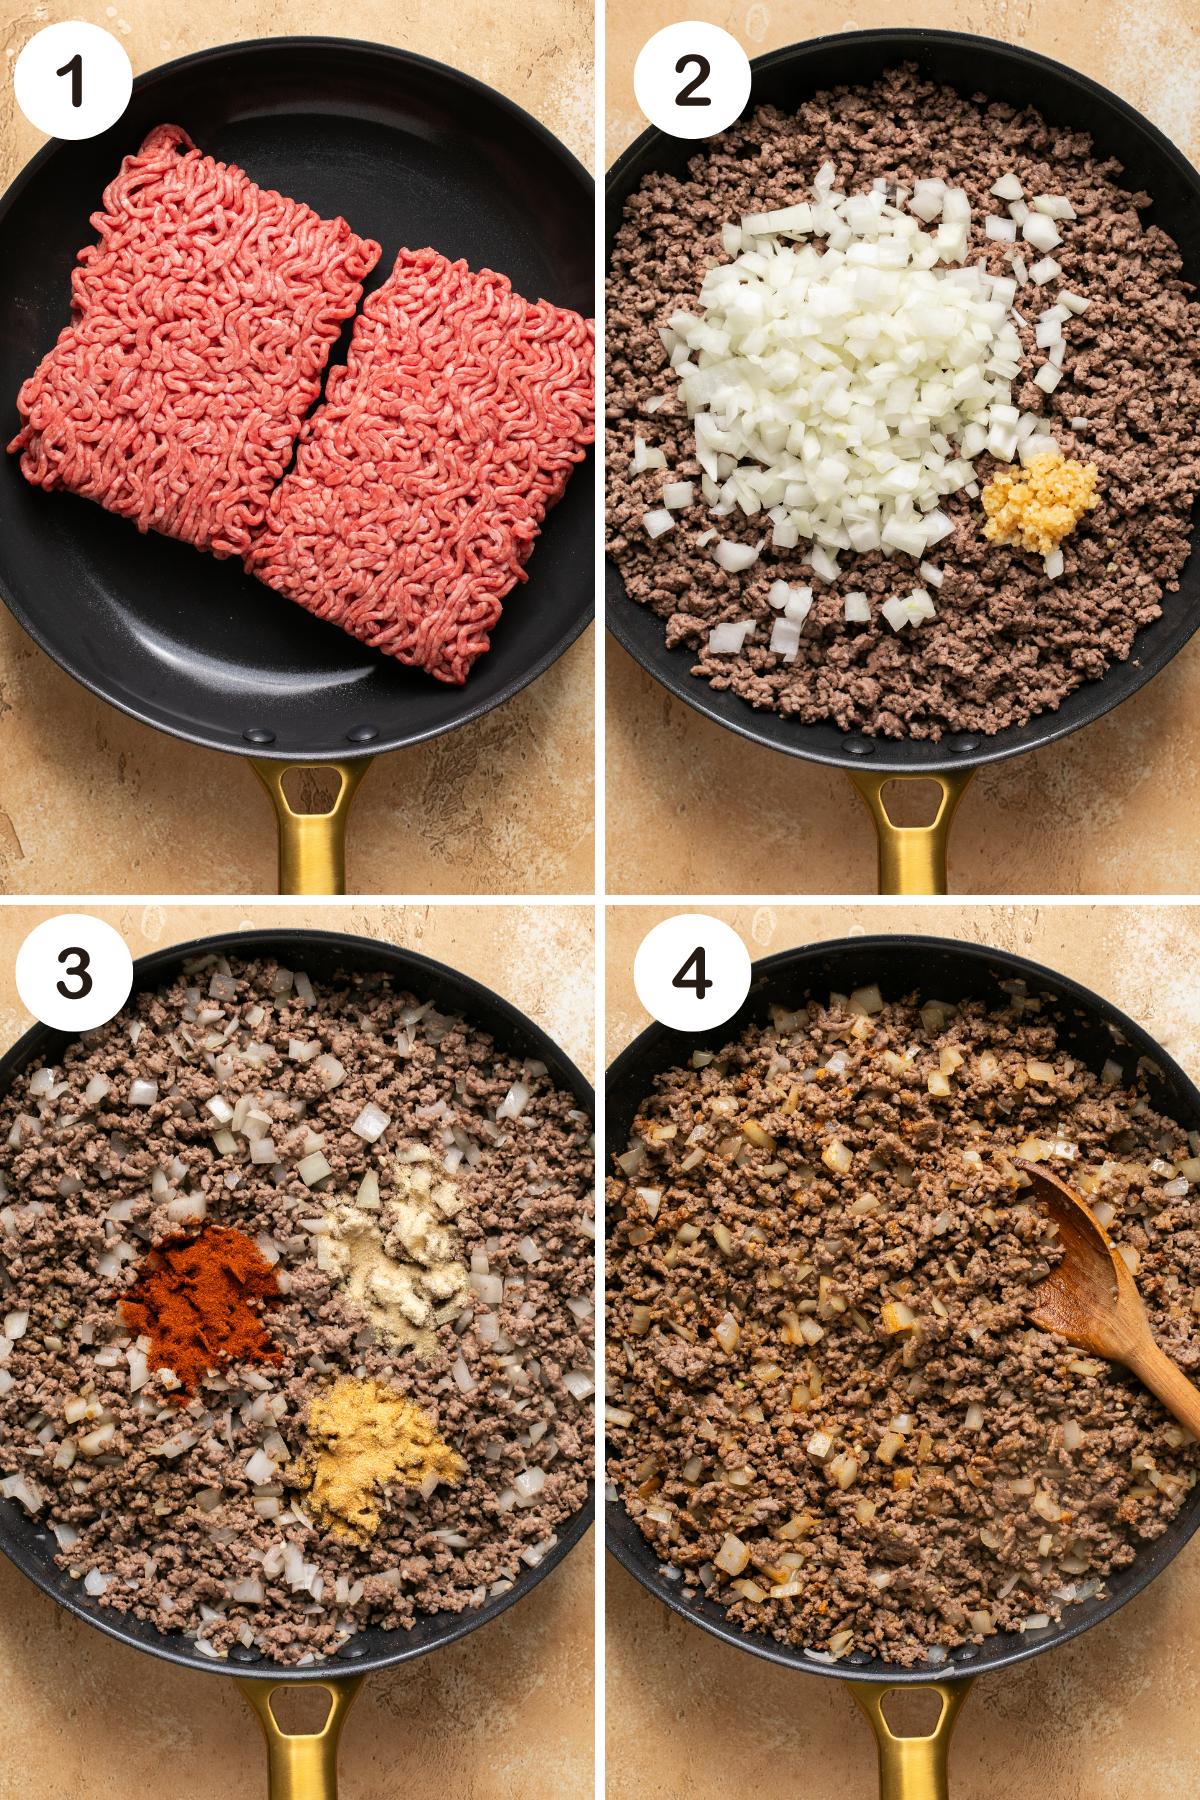 more step by step photos showing how to prepare the meat